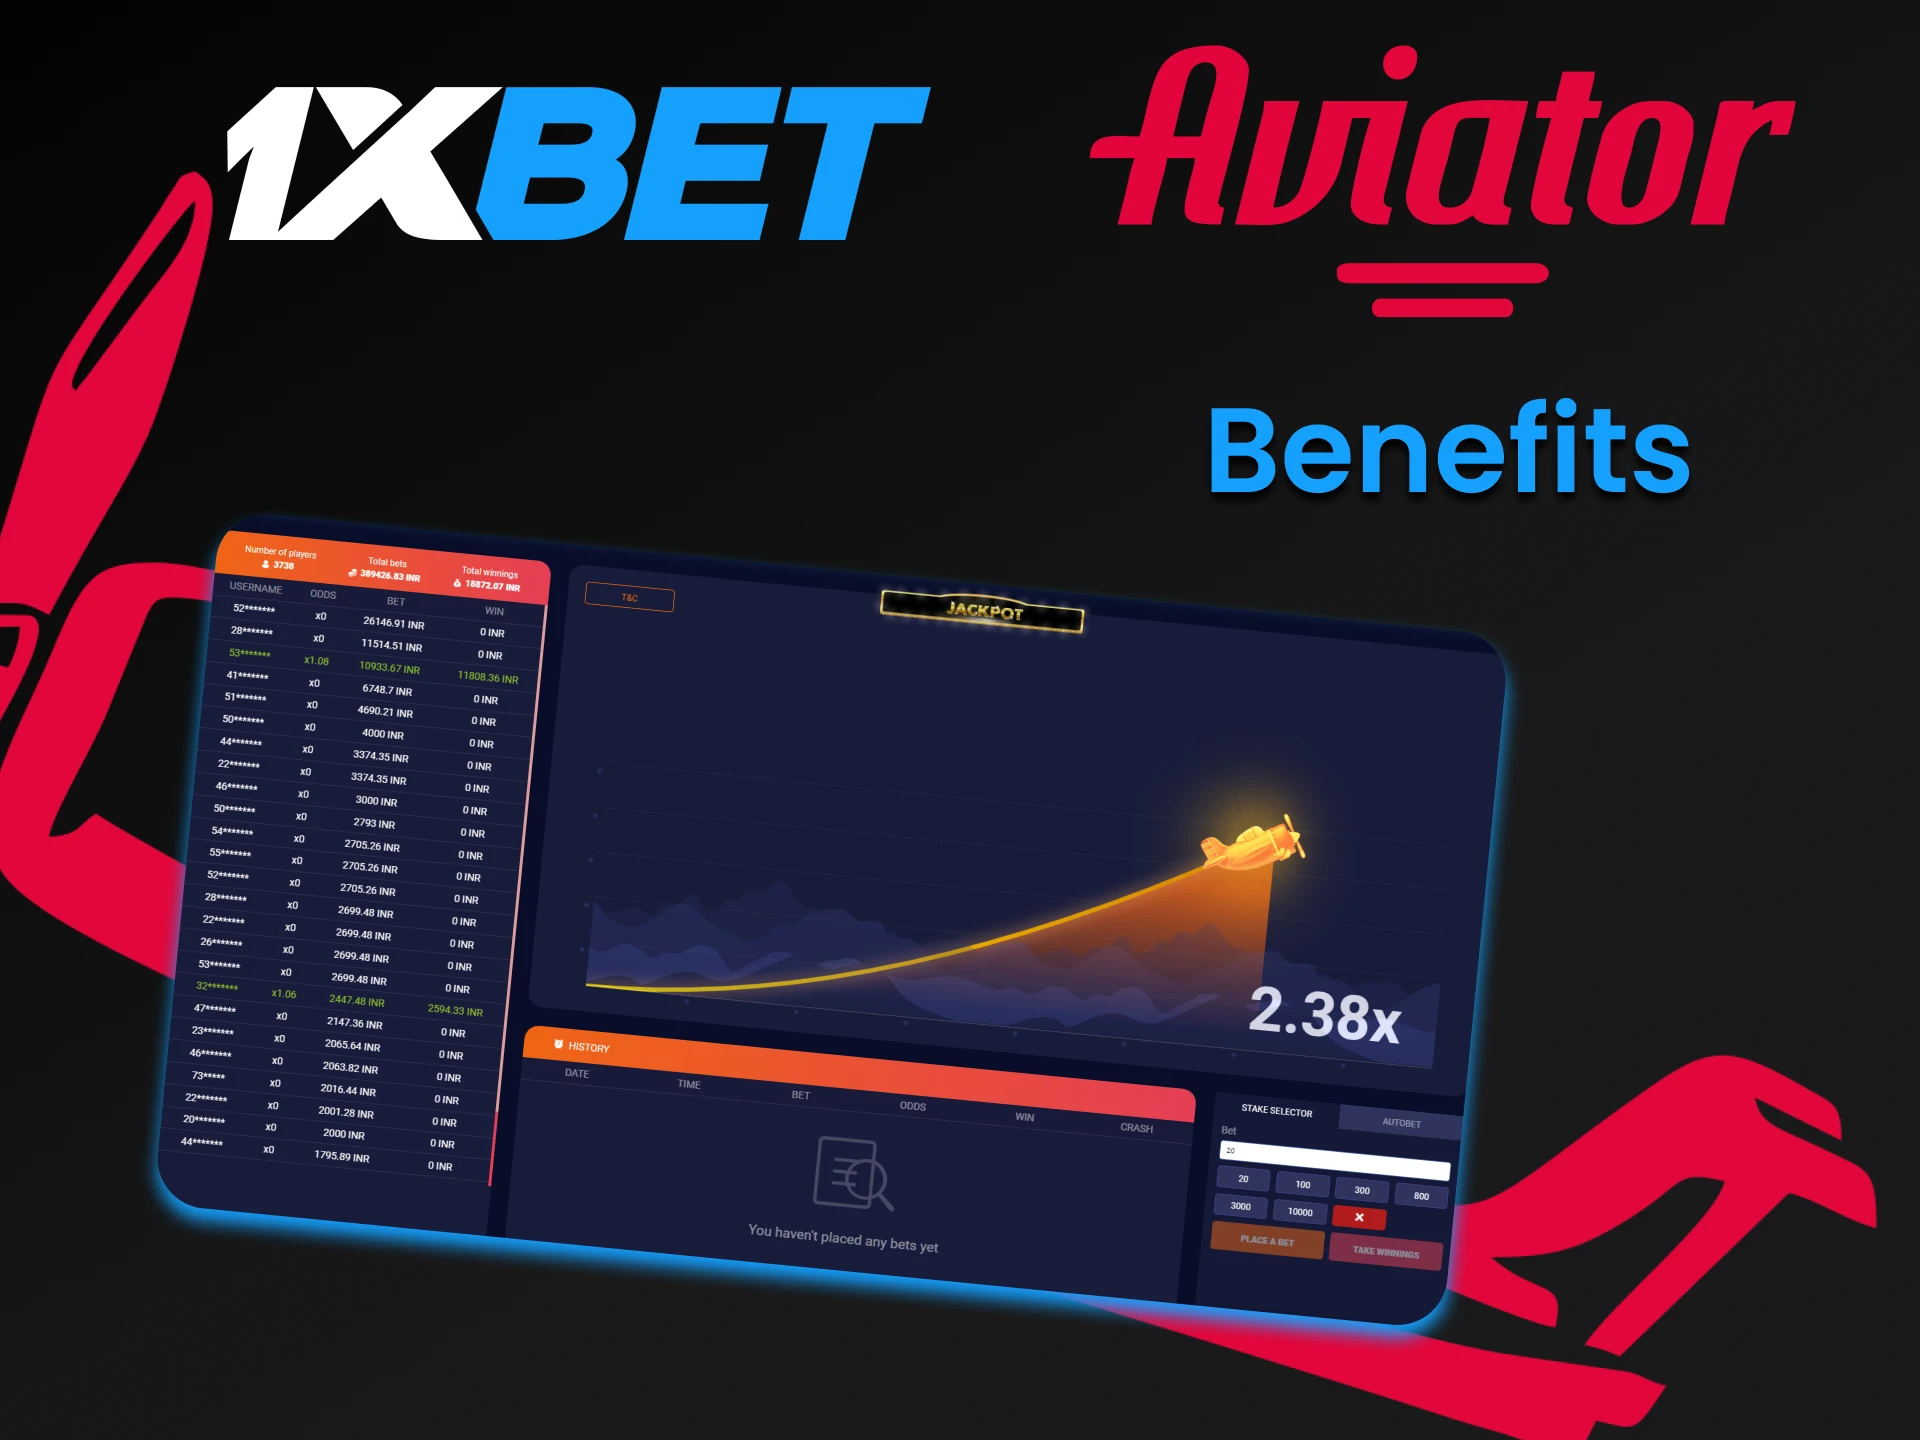 1xbet will pleasantly surprise you for playing Aviator.